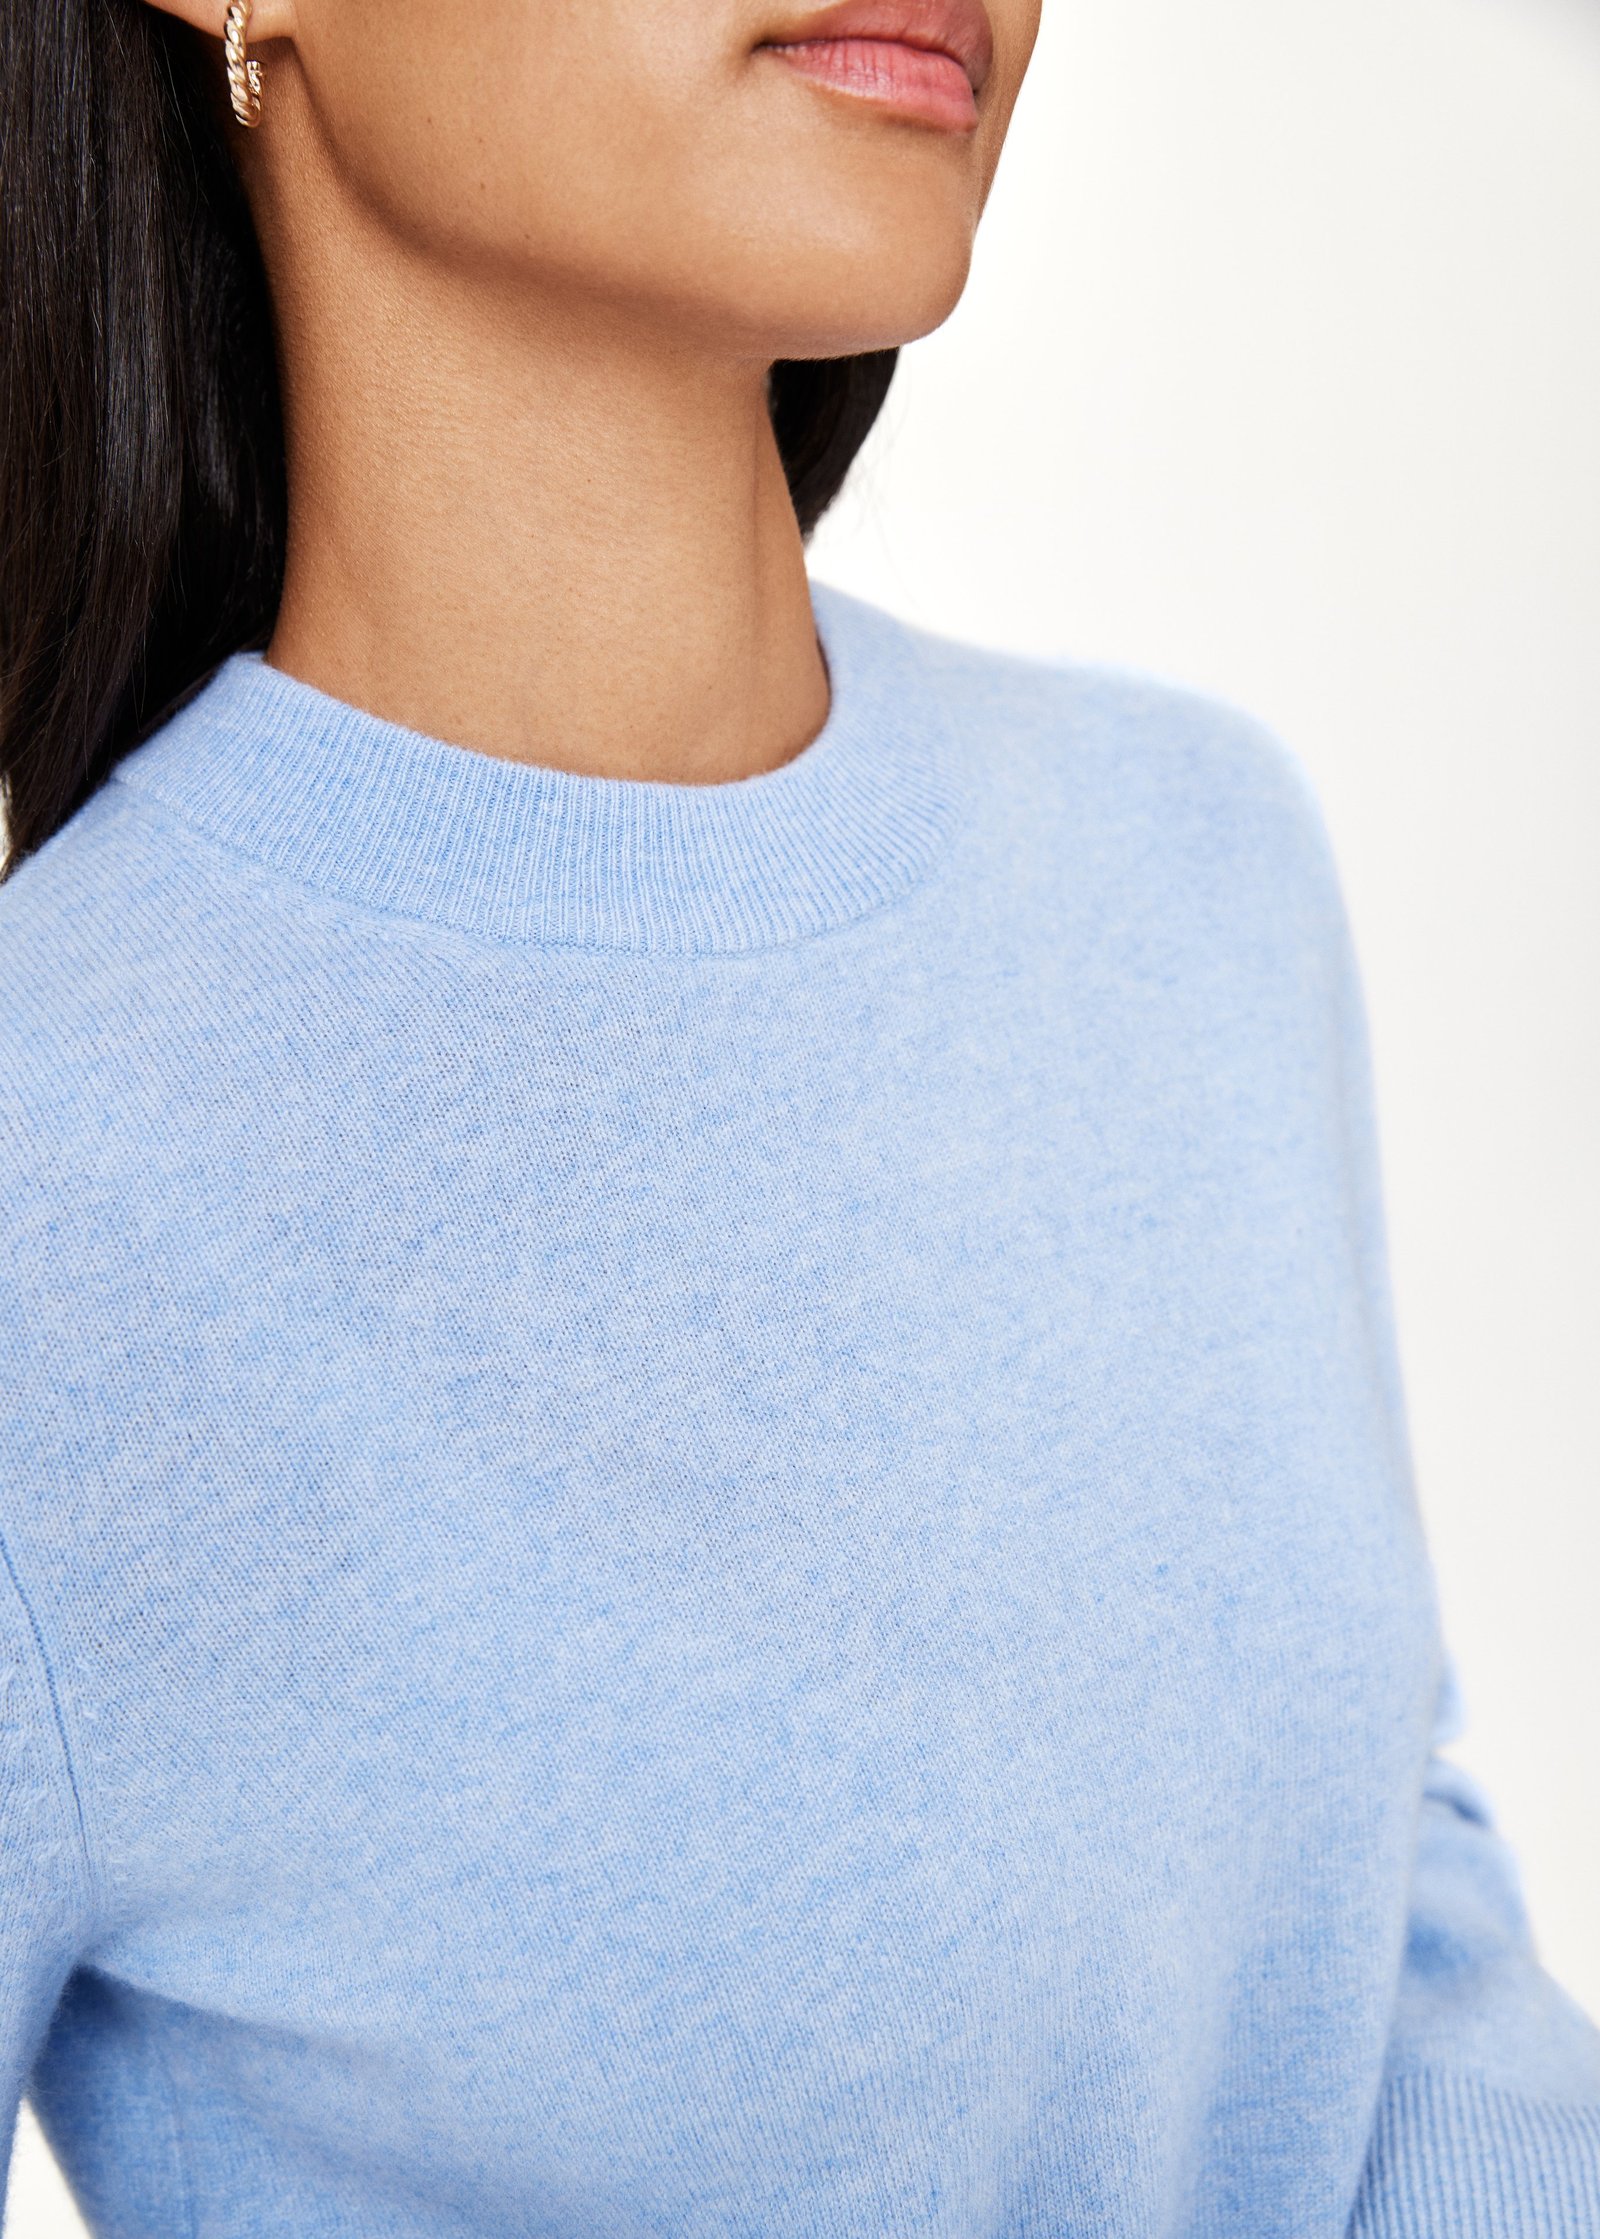 Wool and cashmere sweater Image 5